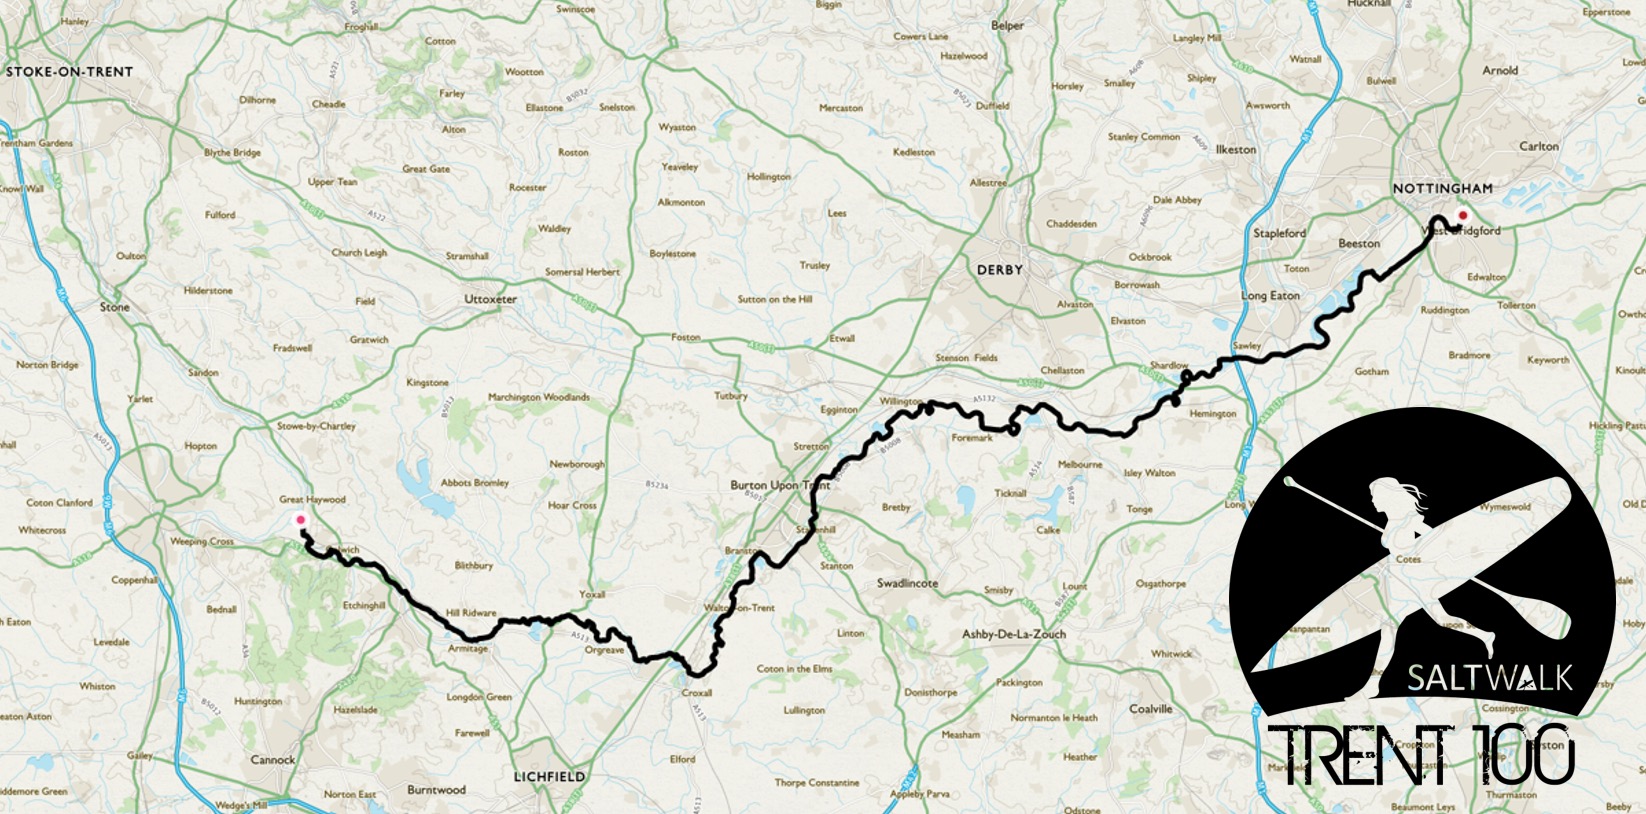 The Trent100 route